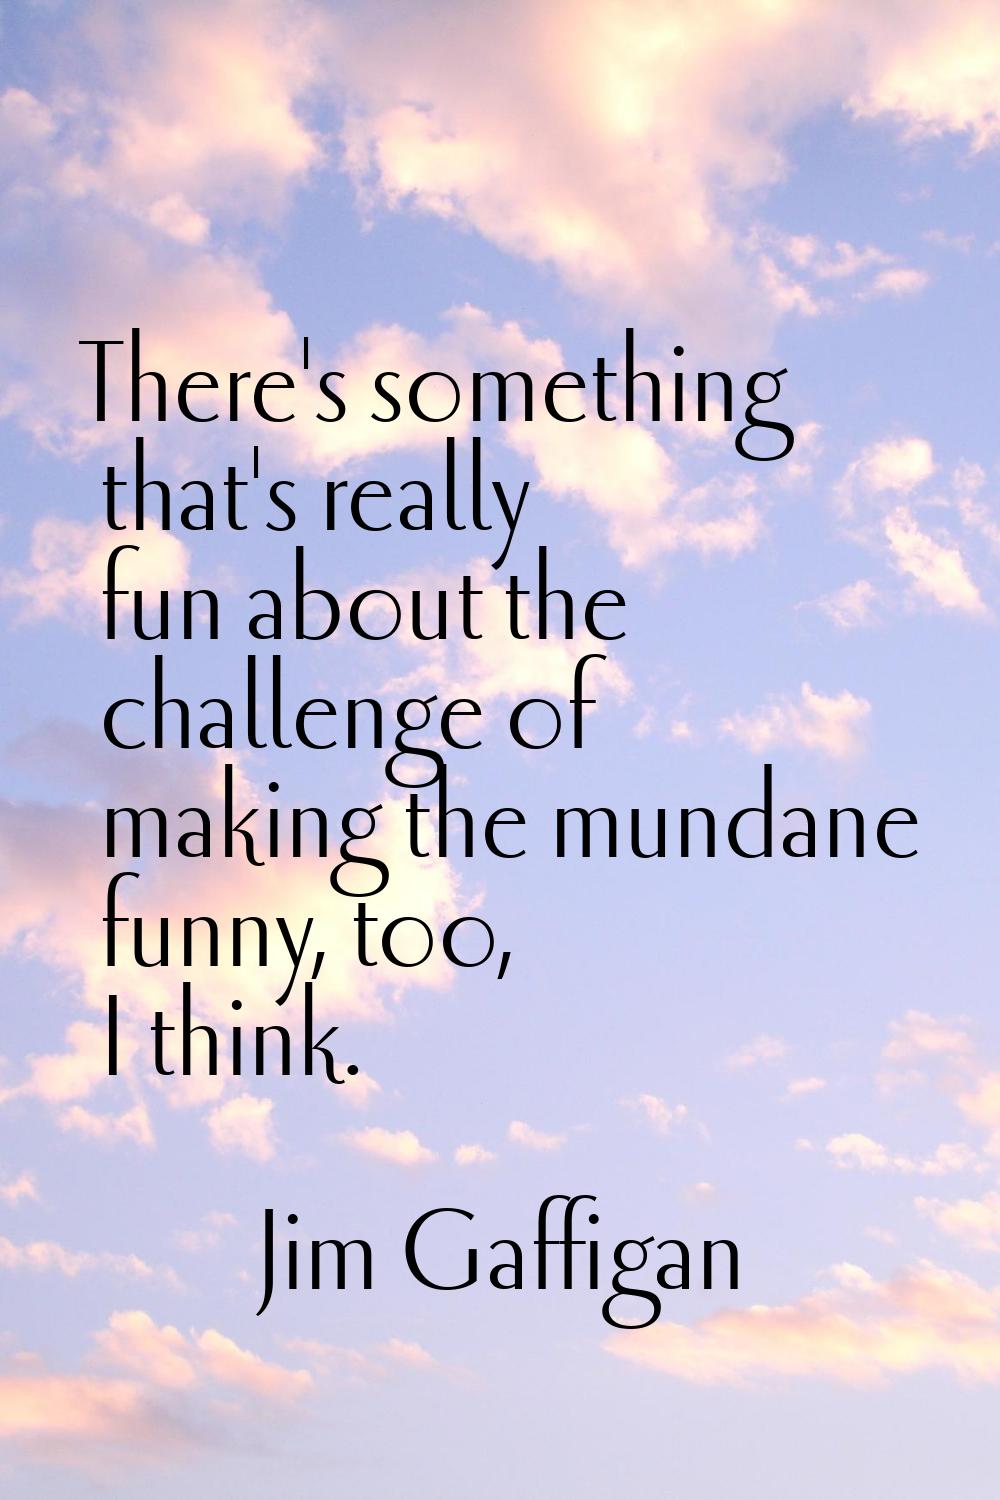 There's something that's really fun about the challenge of making the mundane funny, too, I think.